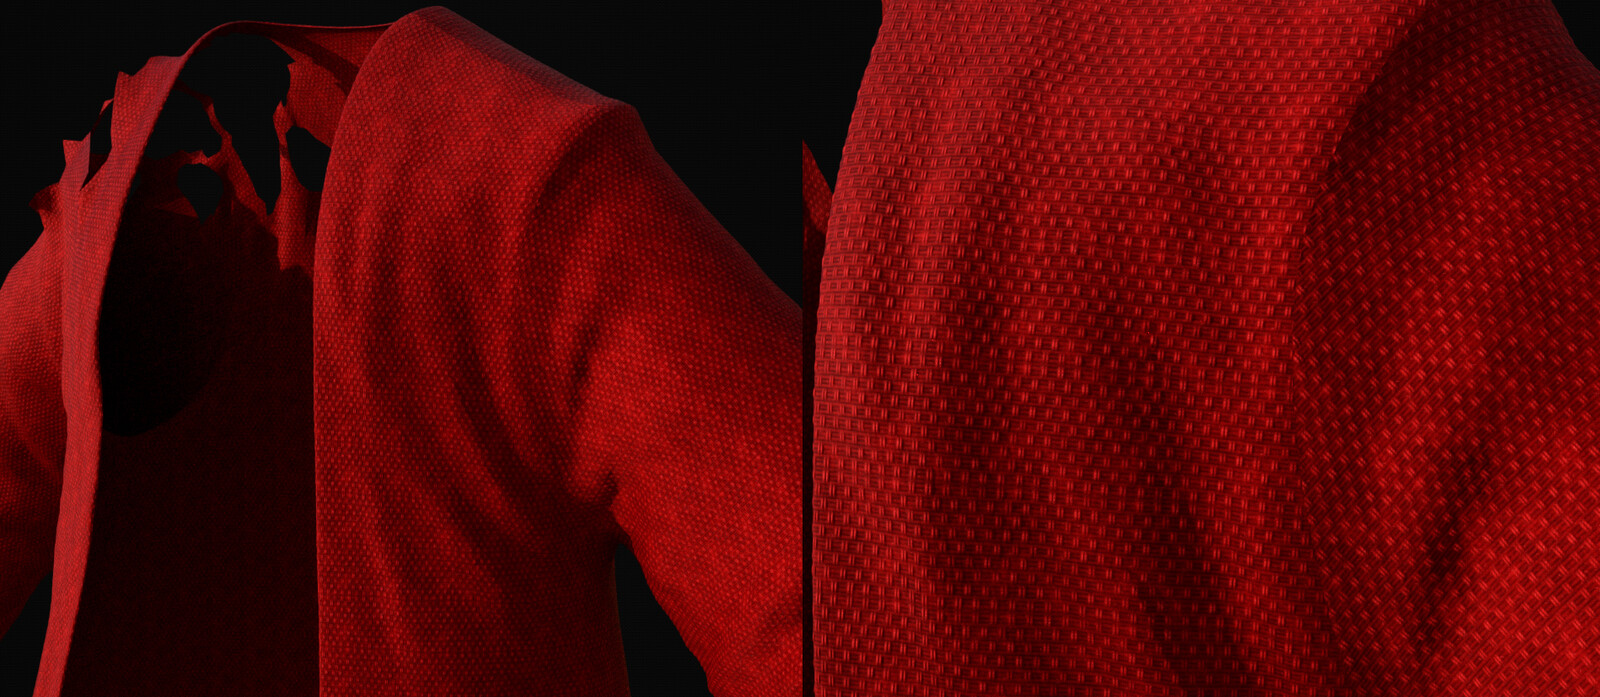 For the Kimono and Skarf i create some Patterns on Substance Designer and baked them using Substance Painter. 